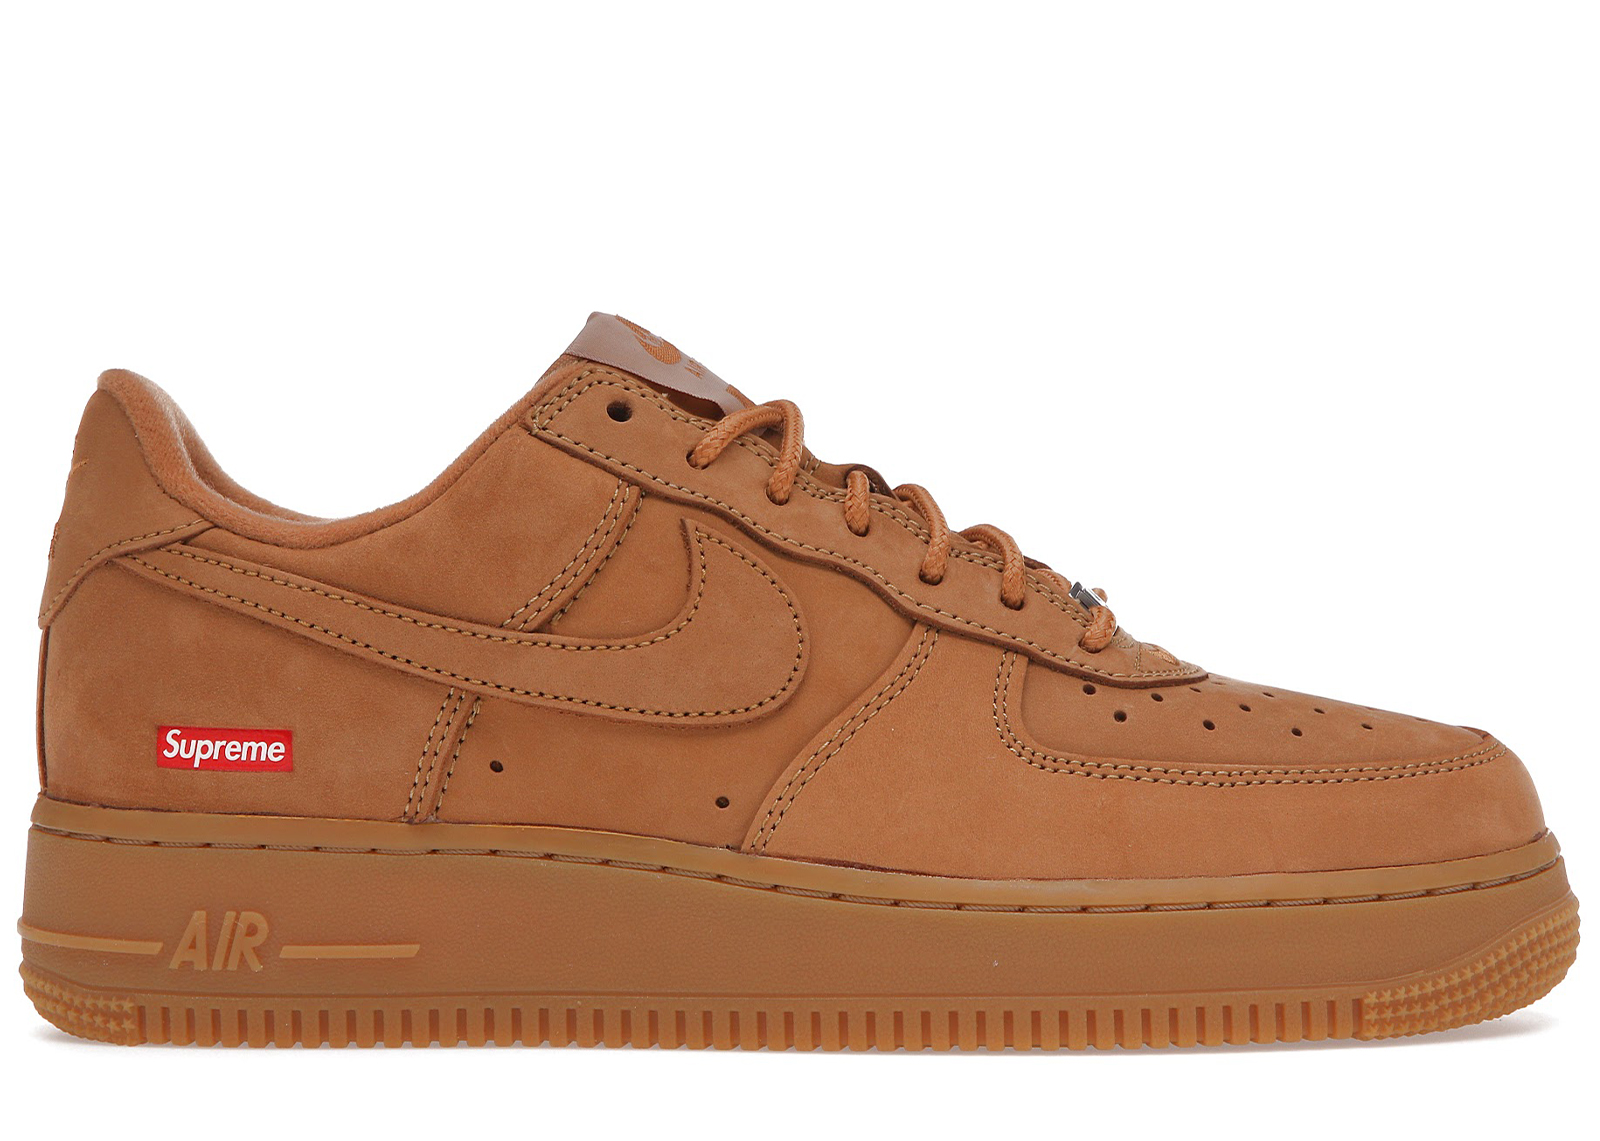 Nike Air Force 1 Low SP Supreme Wheat Men's   DN   US